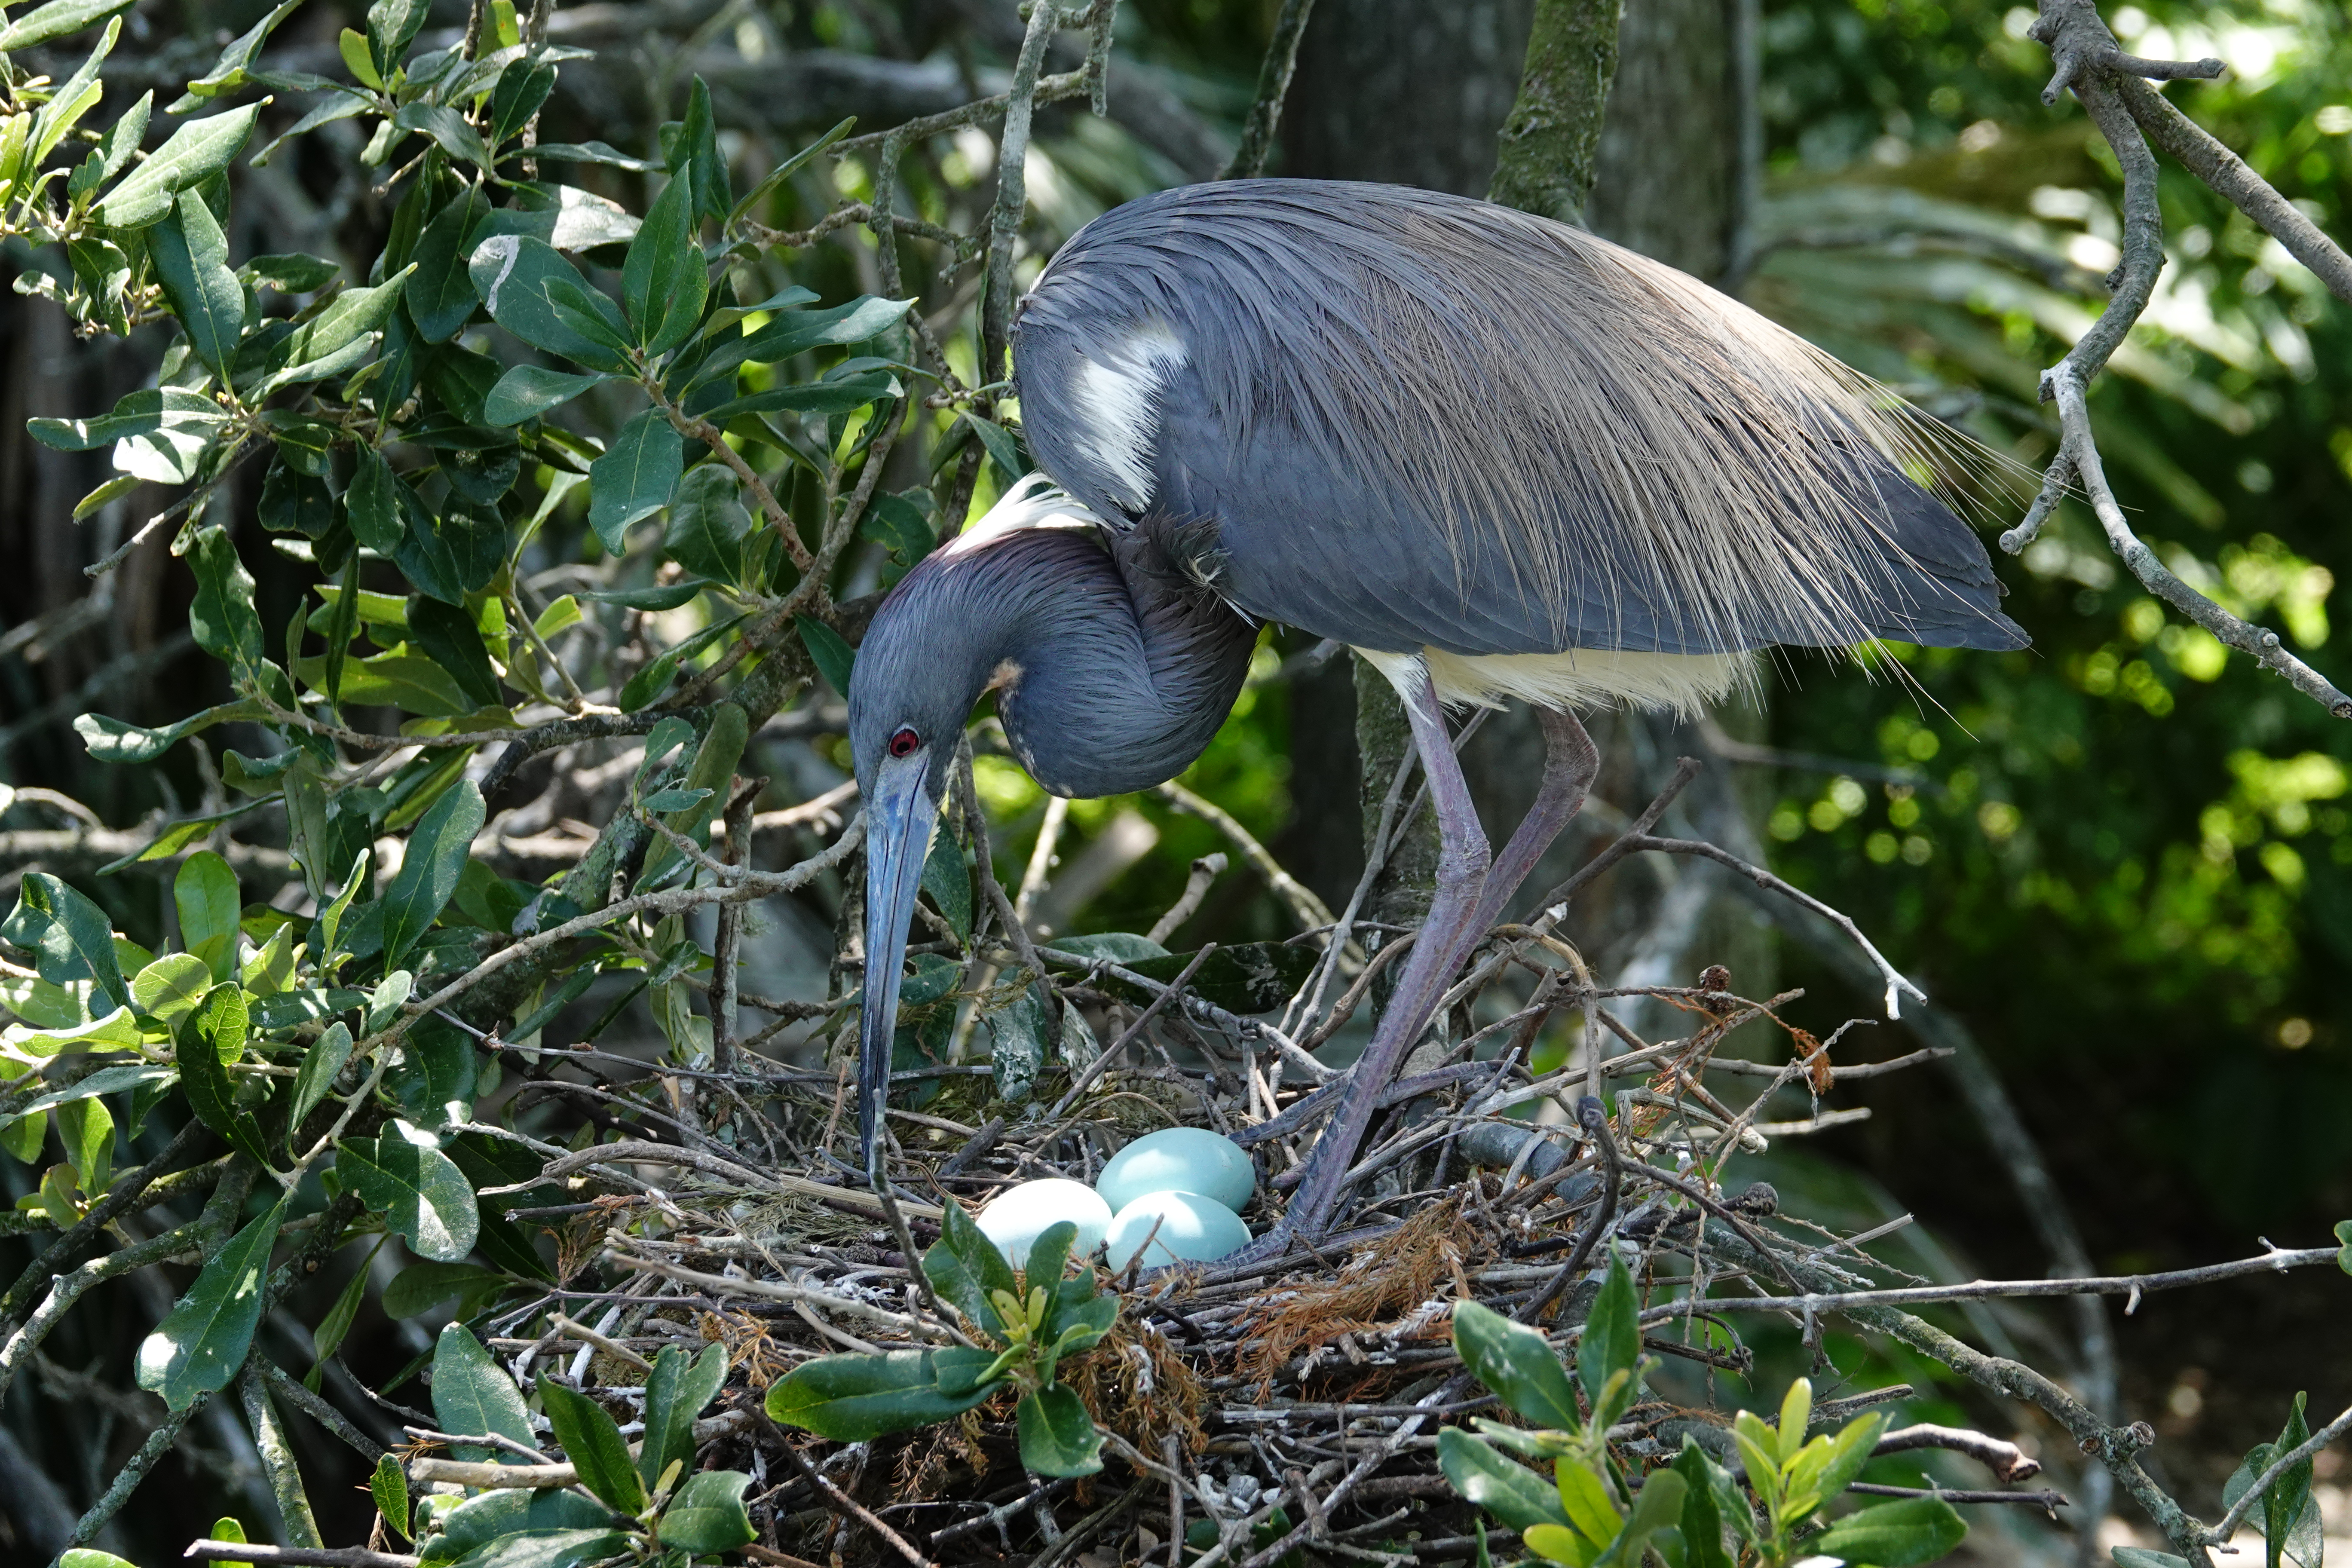 Tri-colored heron with eggs  -  Alligator Farm Zoological Park, St. Augustine, Florida 